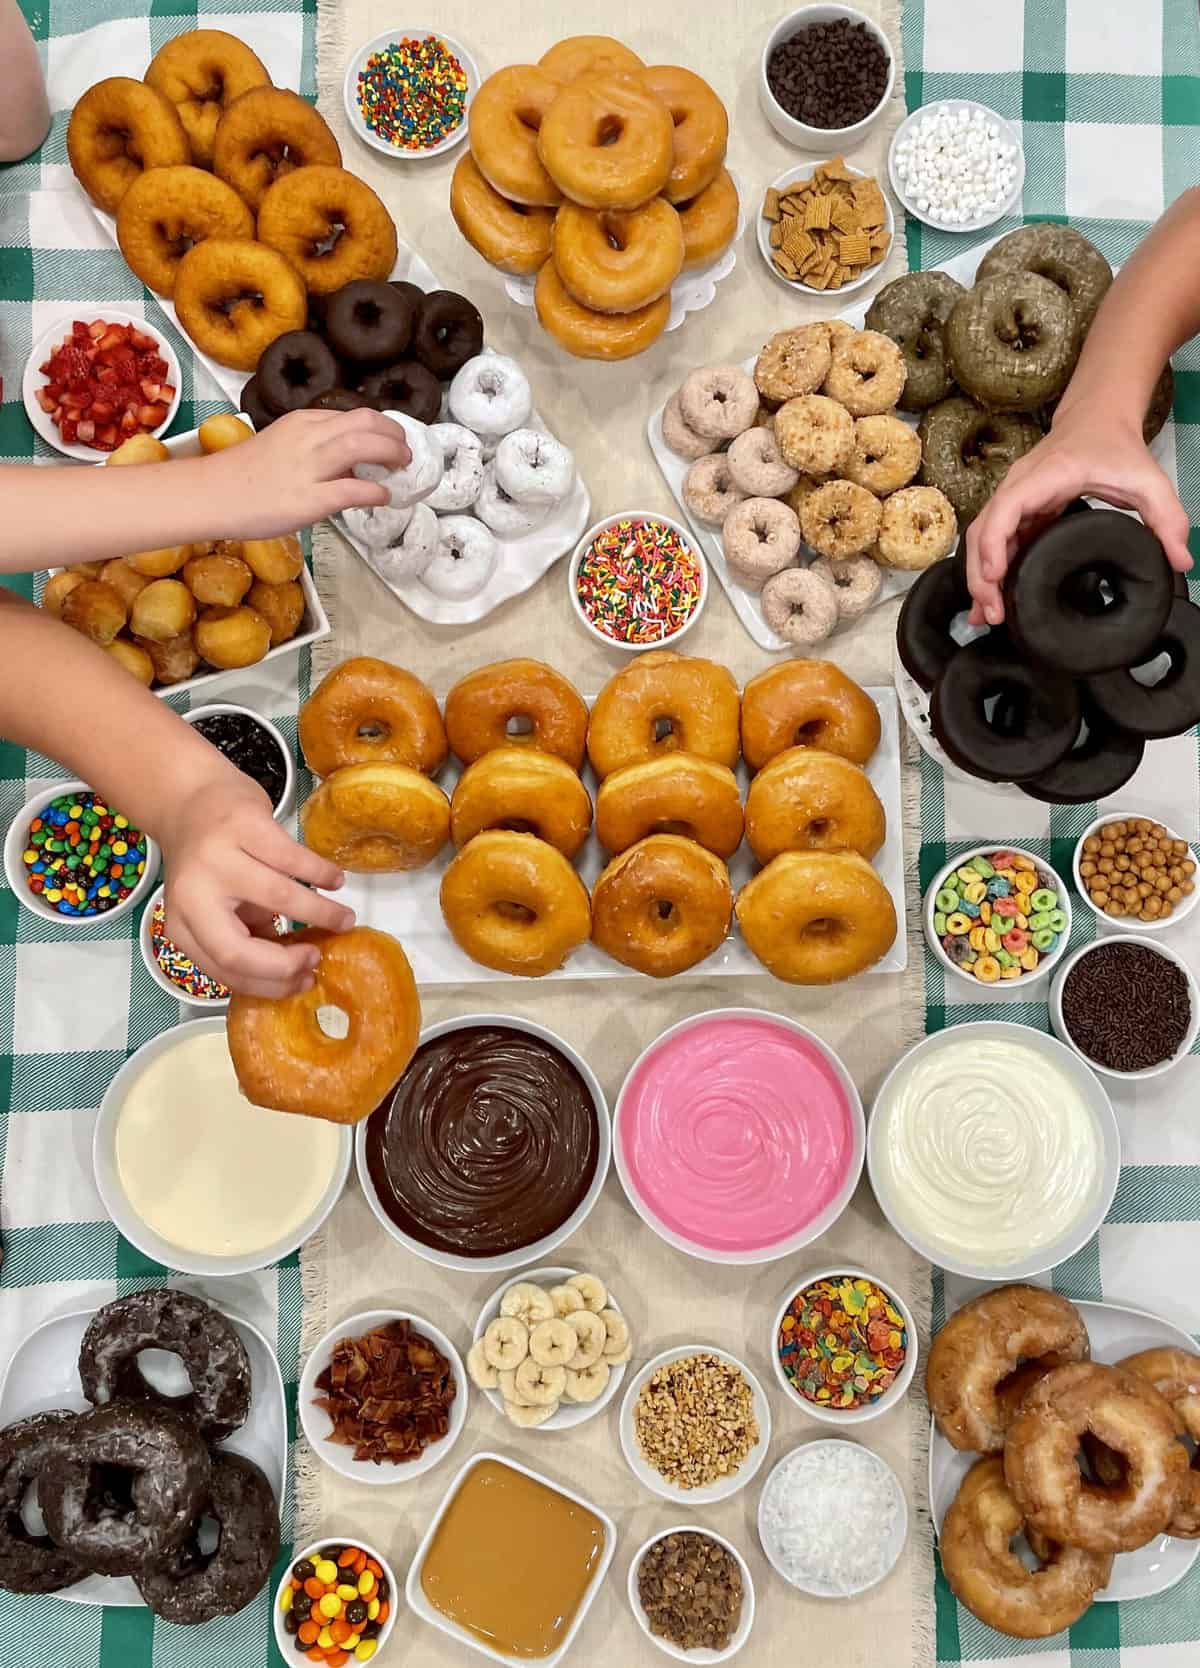 Decorate-Your-Own Donut Spread